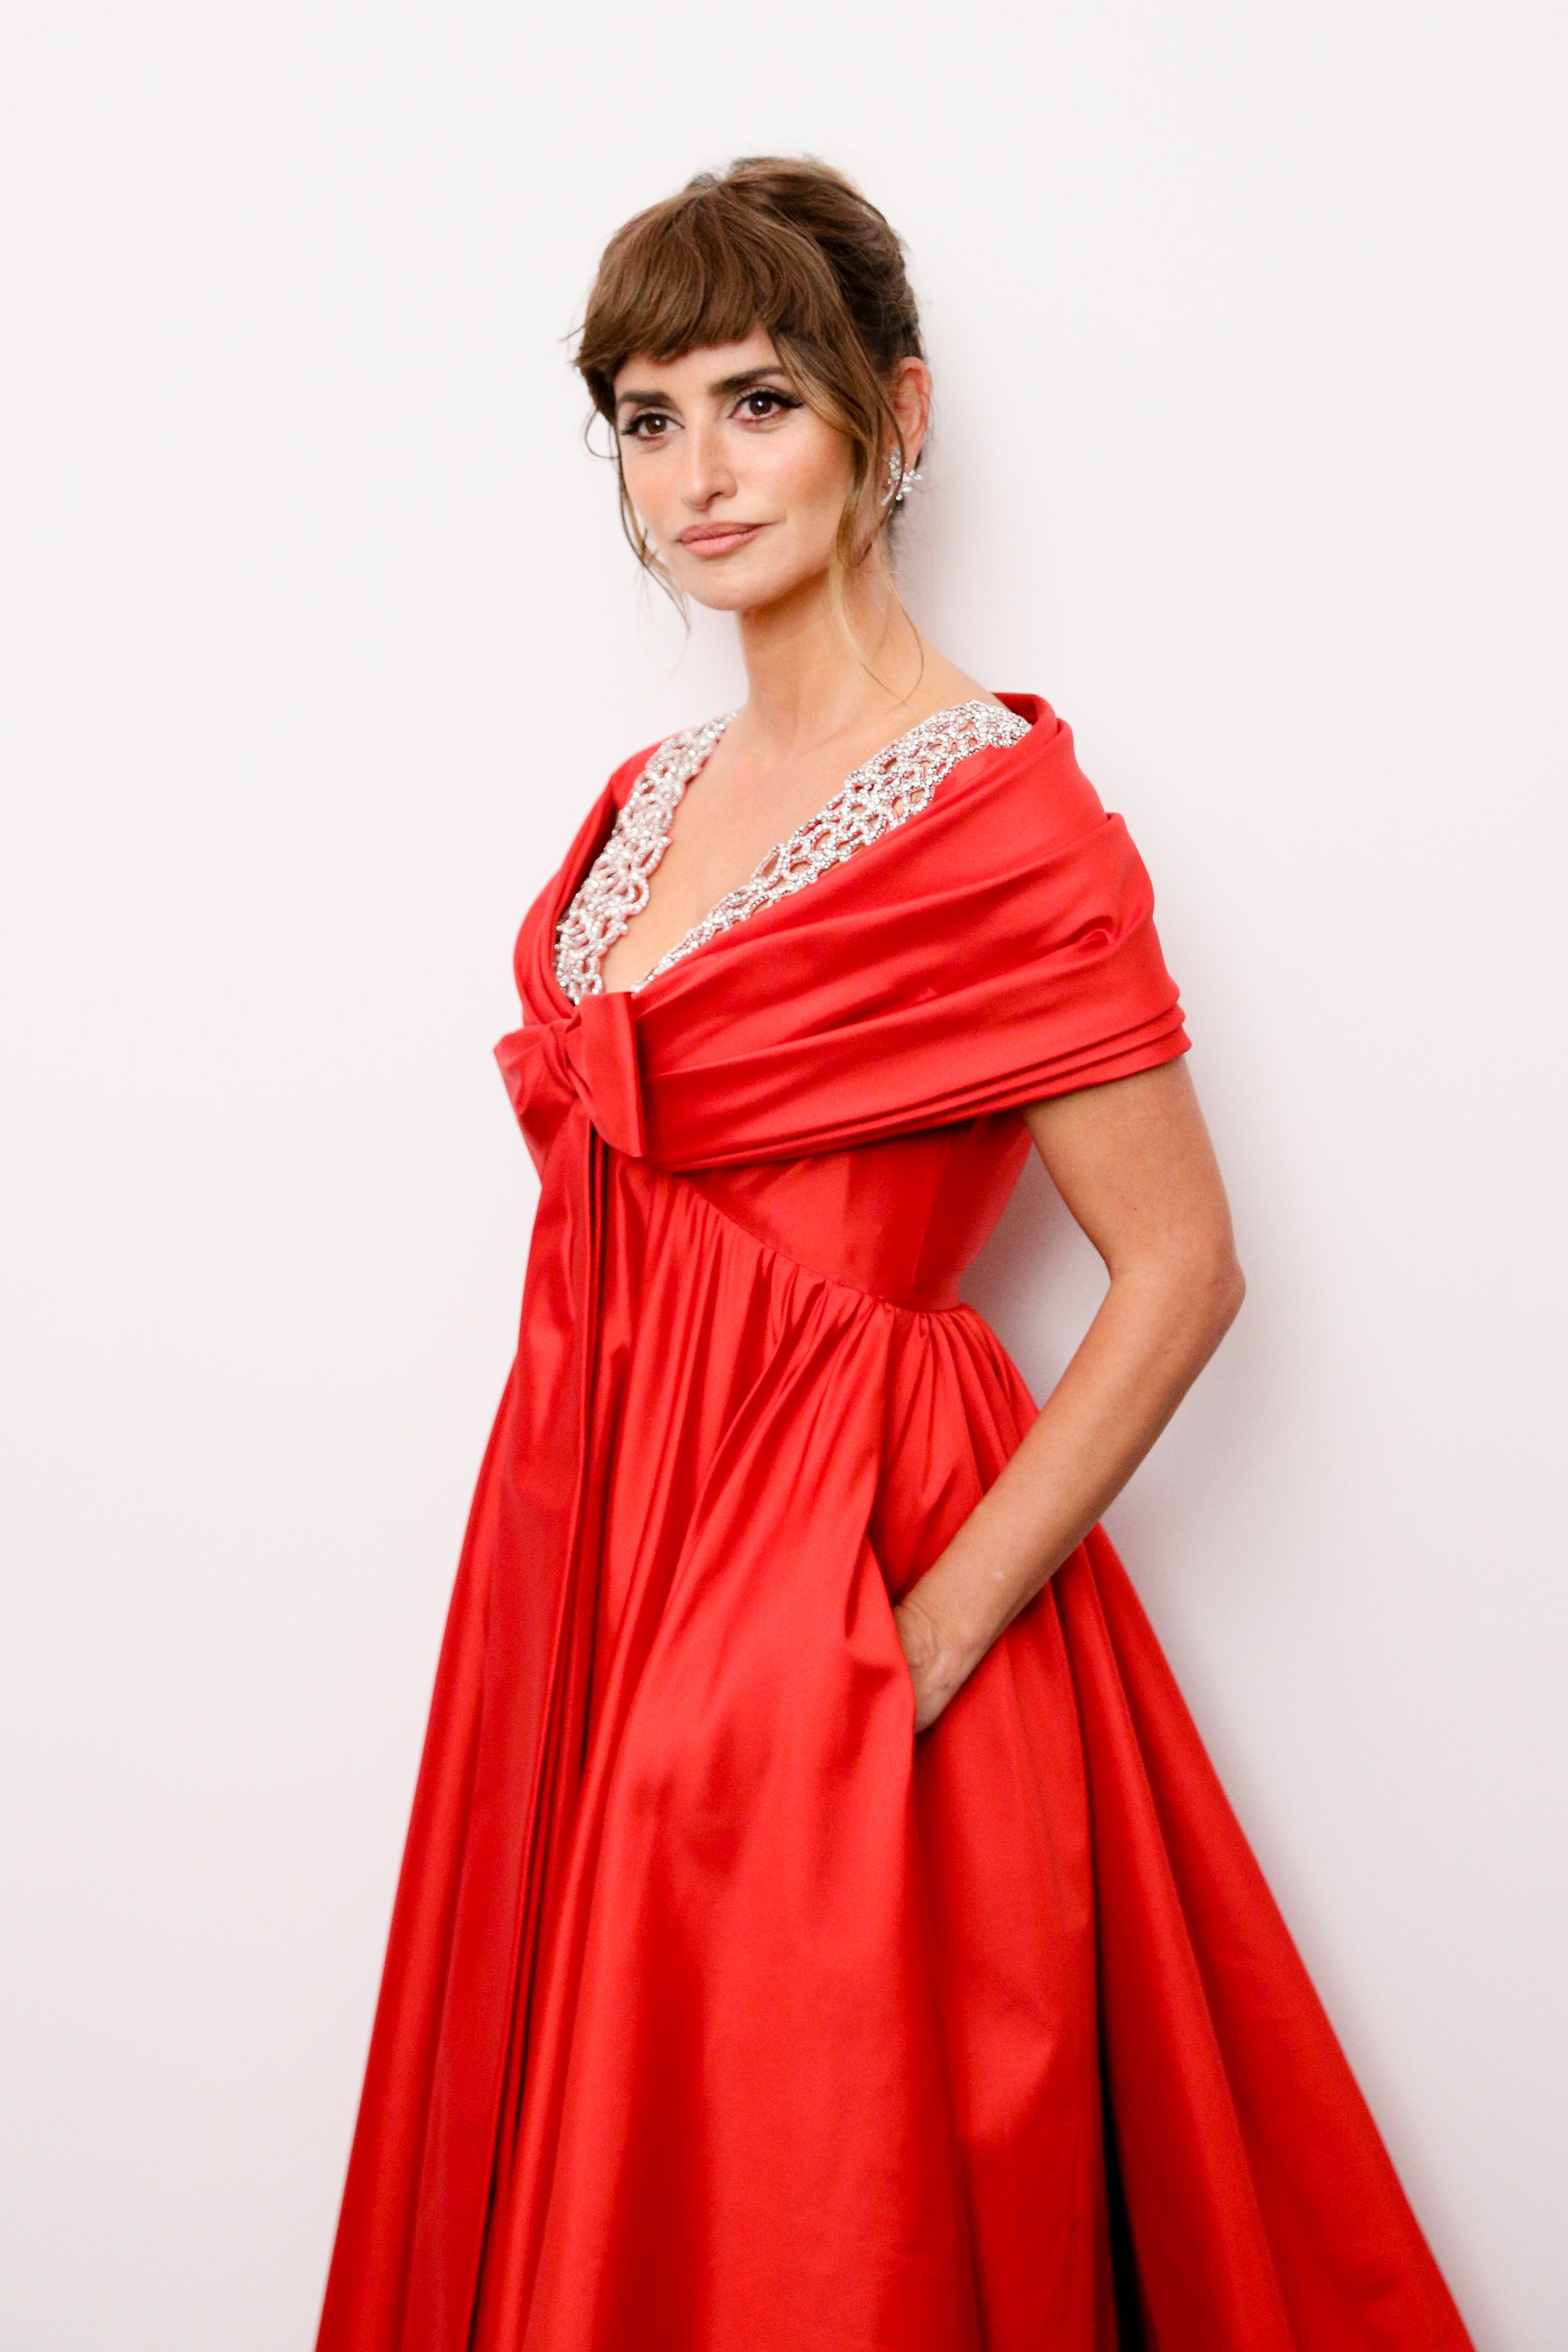 Penélope Cruz cuts a VERY stylish figure in Chanel as she jets out